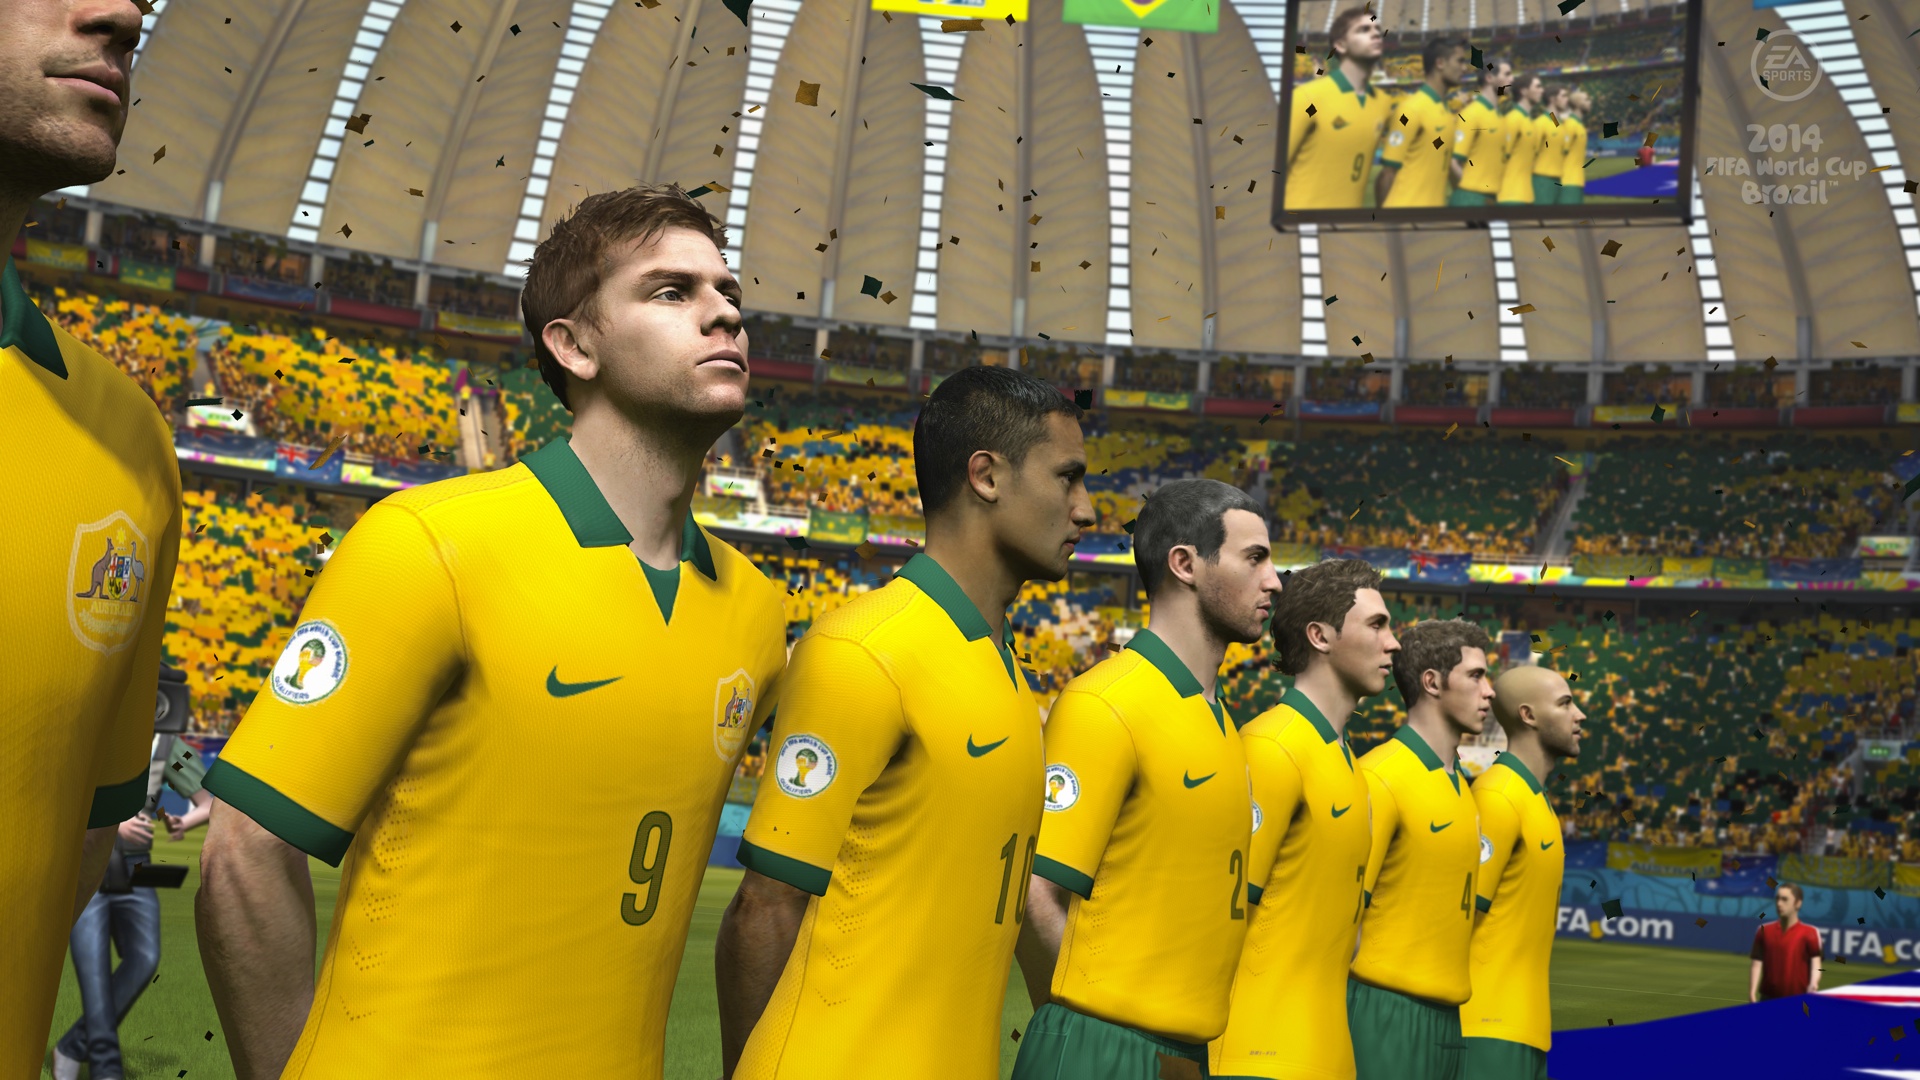 Is 2014 FIFA World Cup Brazil one football game too many?